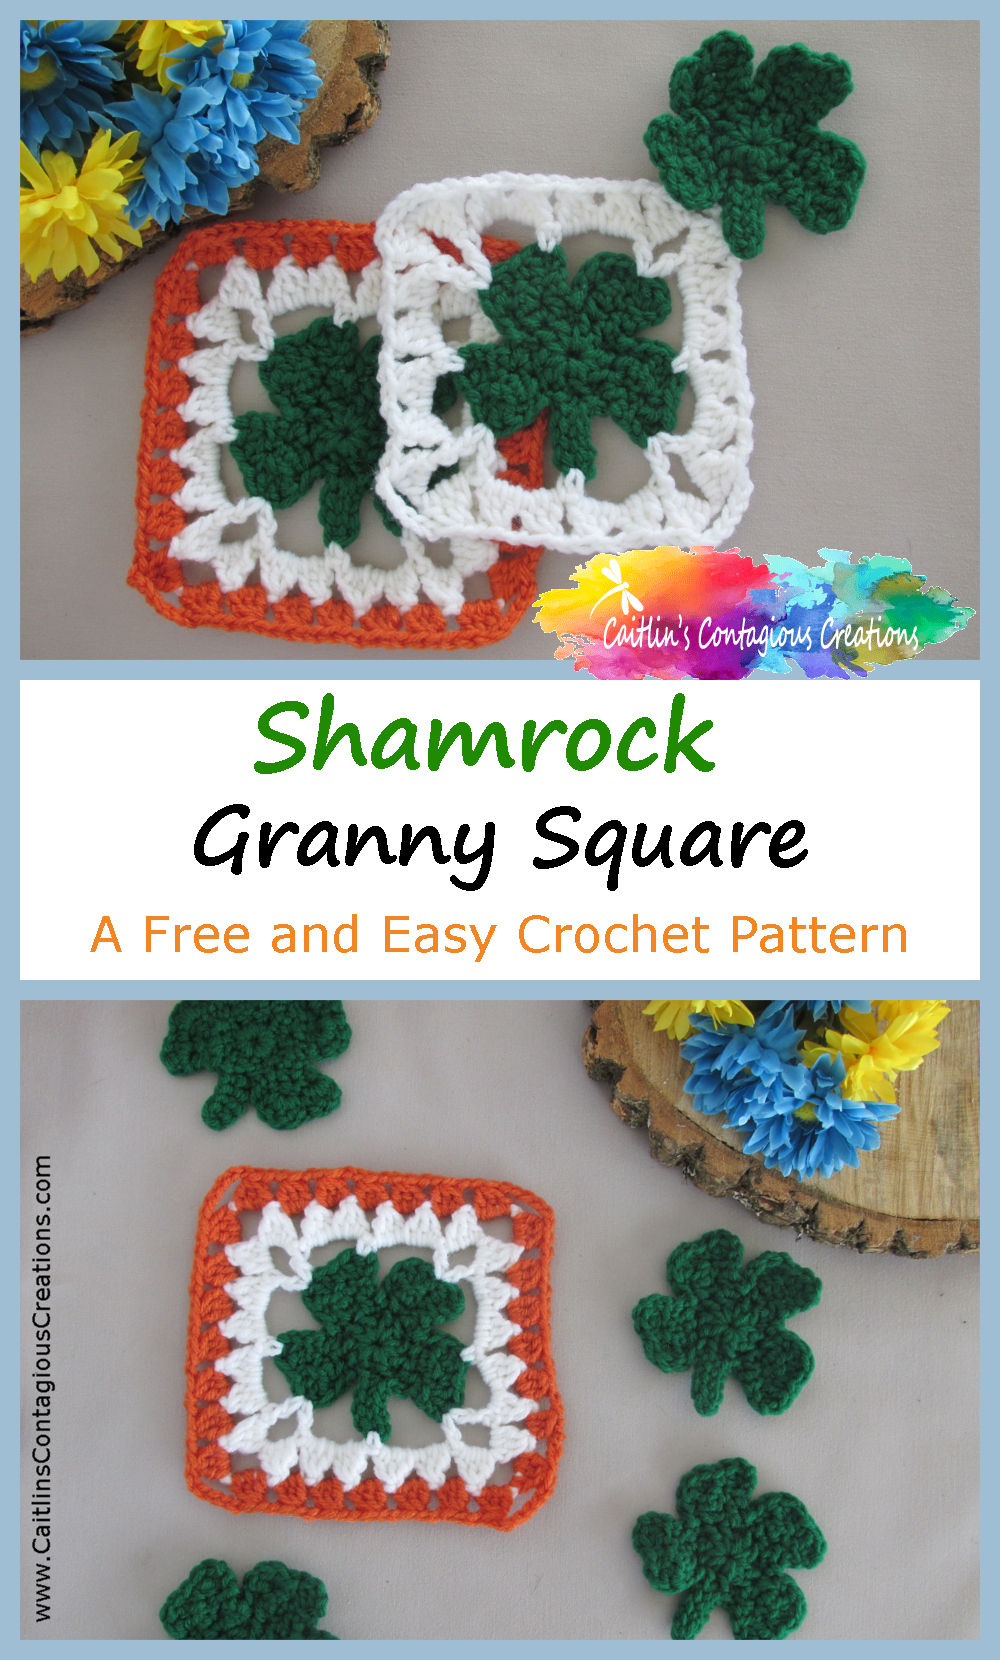 This Shamrock Granny Square Crochet Pattern from Caitlin's Contagious Creations is perfect for St. Paddy's Day and more! An easy Irish flower afghan square crochet design is perfect to make a garland or blanket, but you could also create a laptop or tablet case or a scarf or shawl! Try this free Four 4 Lead Clover  granny square crochet pattern today!